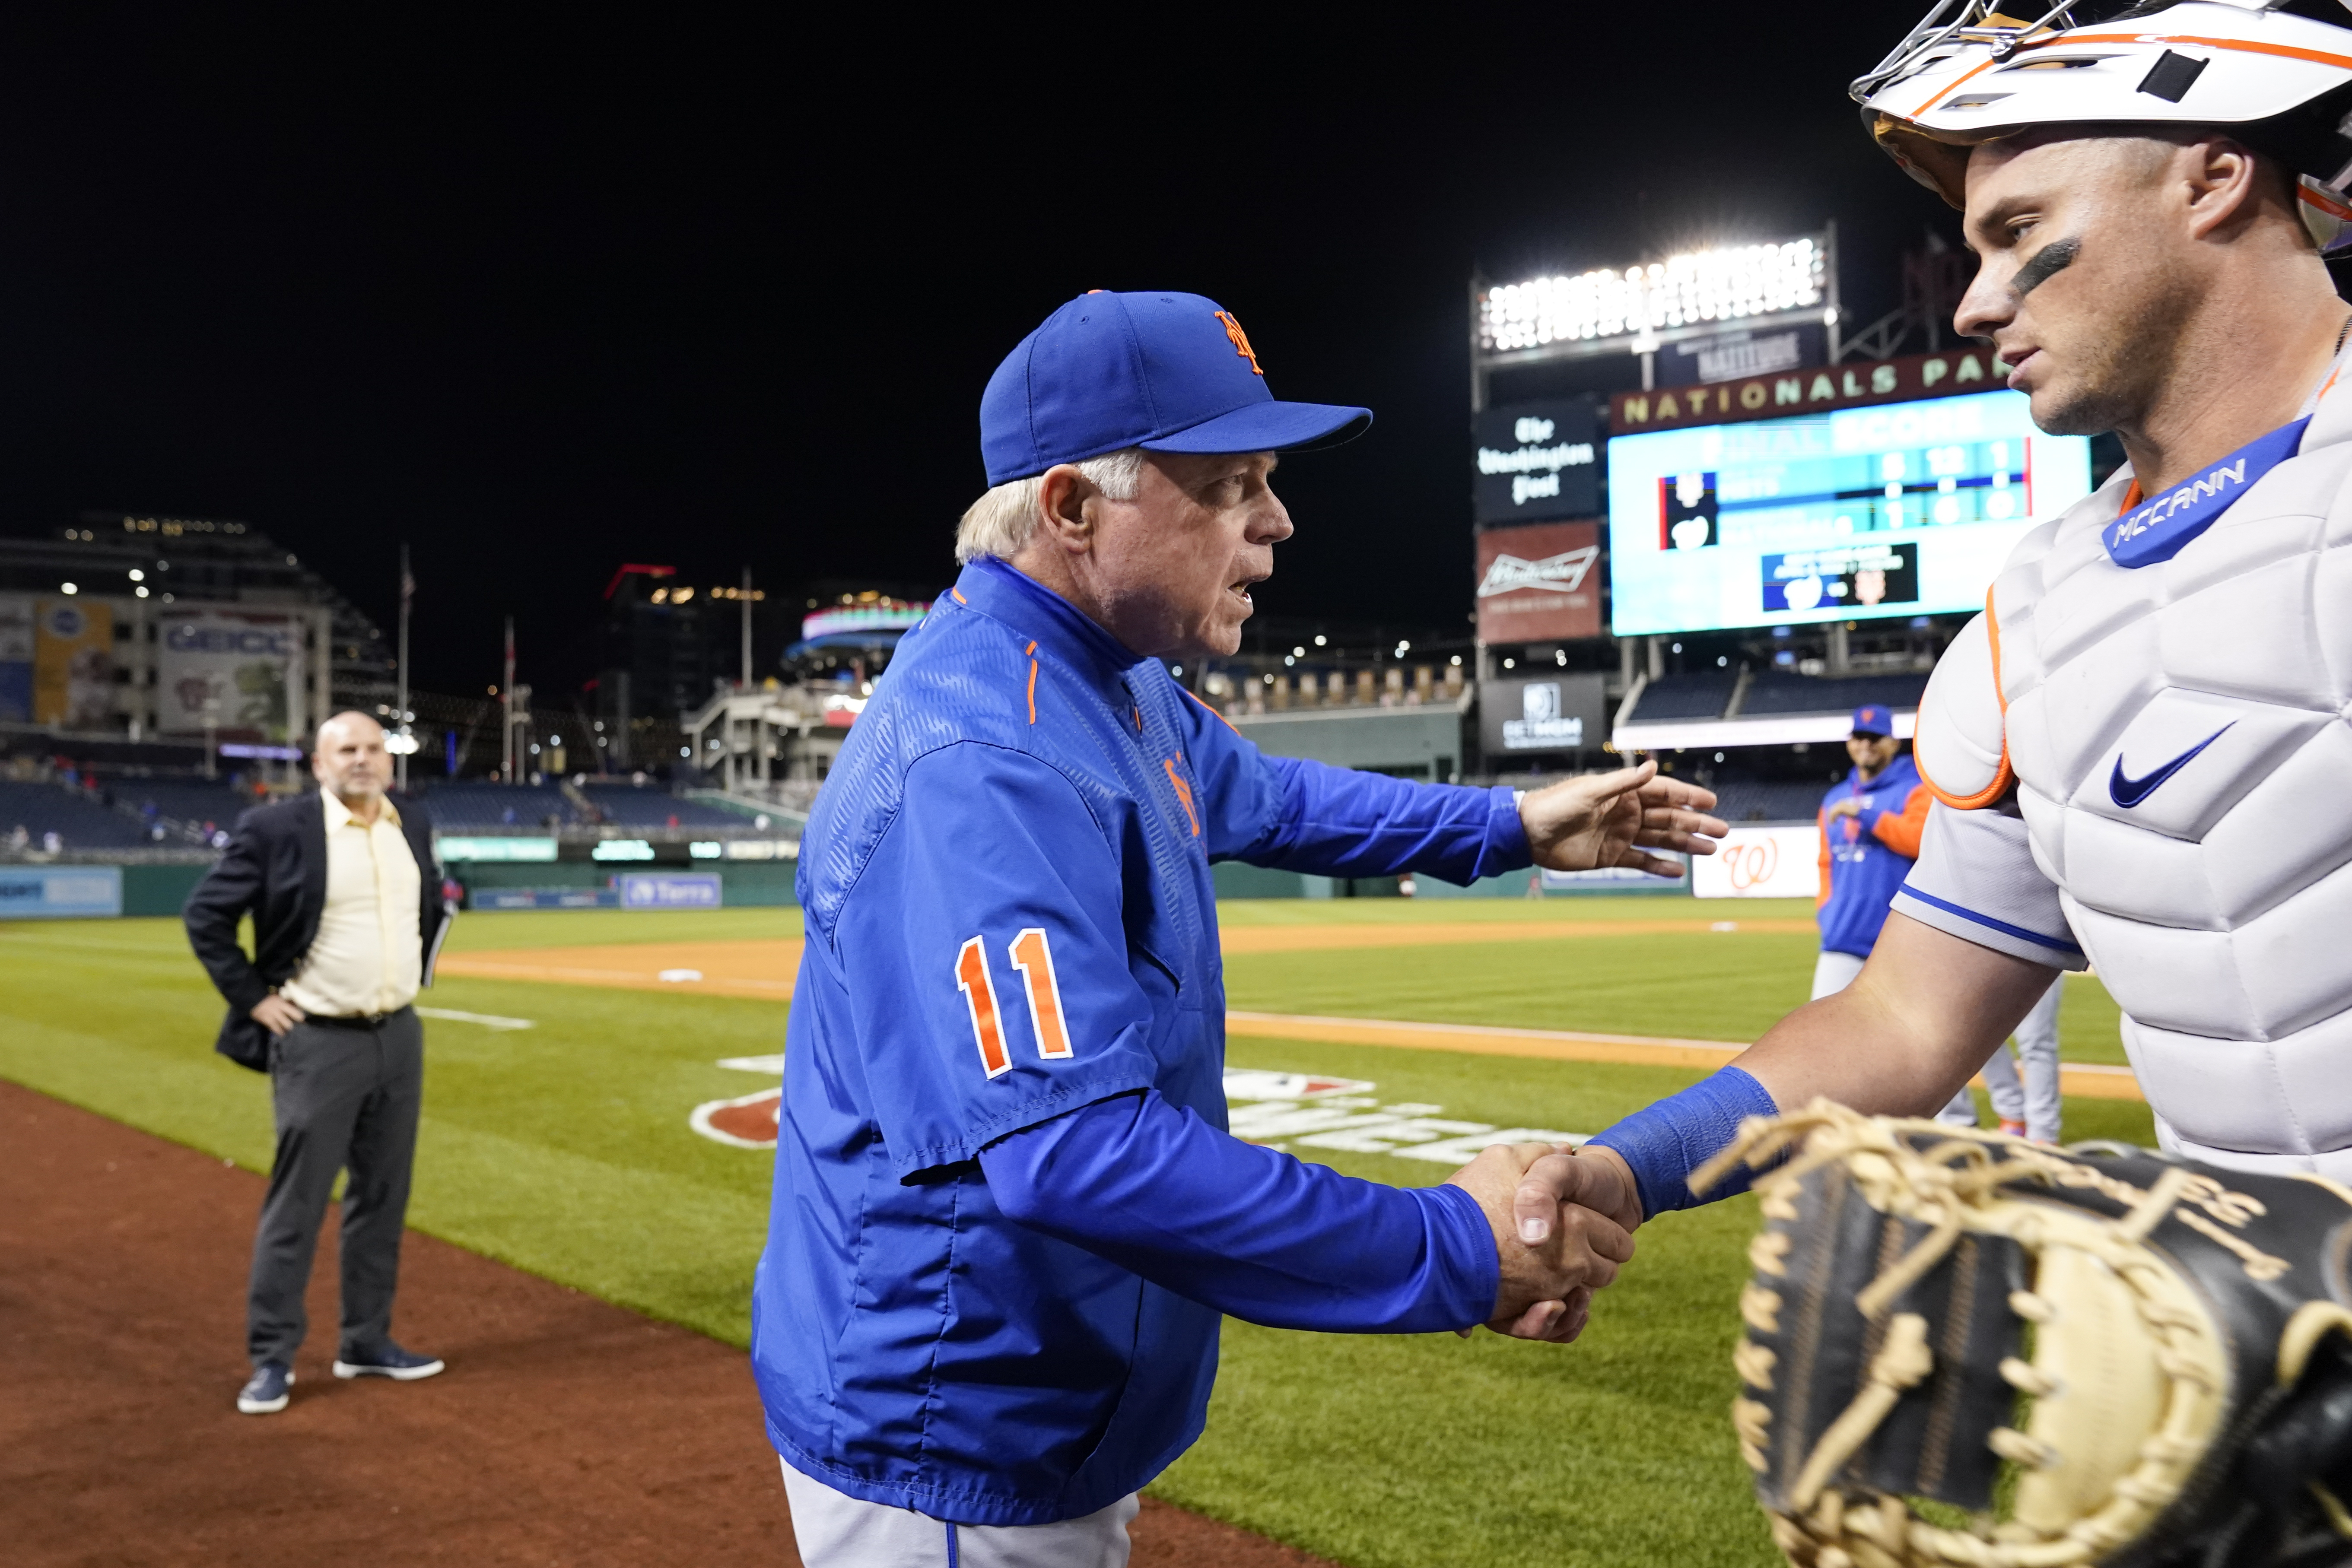 Buck Showalter reacts to Mets seventh shutout loss of the season